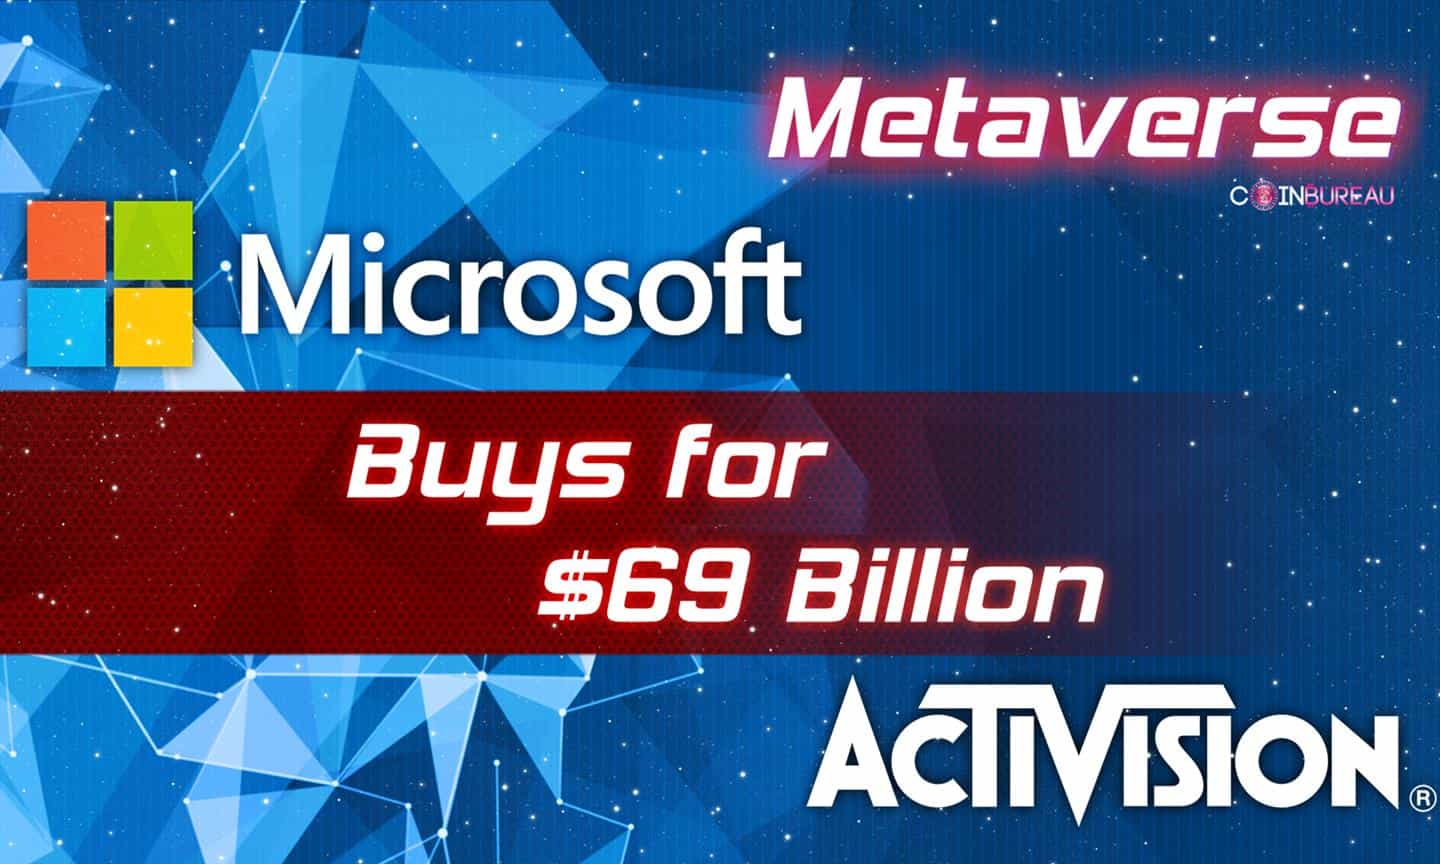 Microsoft makes a Metaverse Move, Buys Activision for $69 Billion